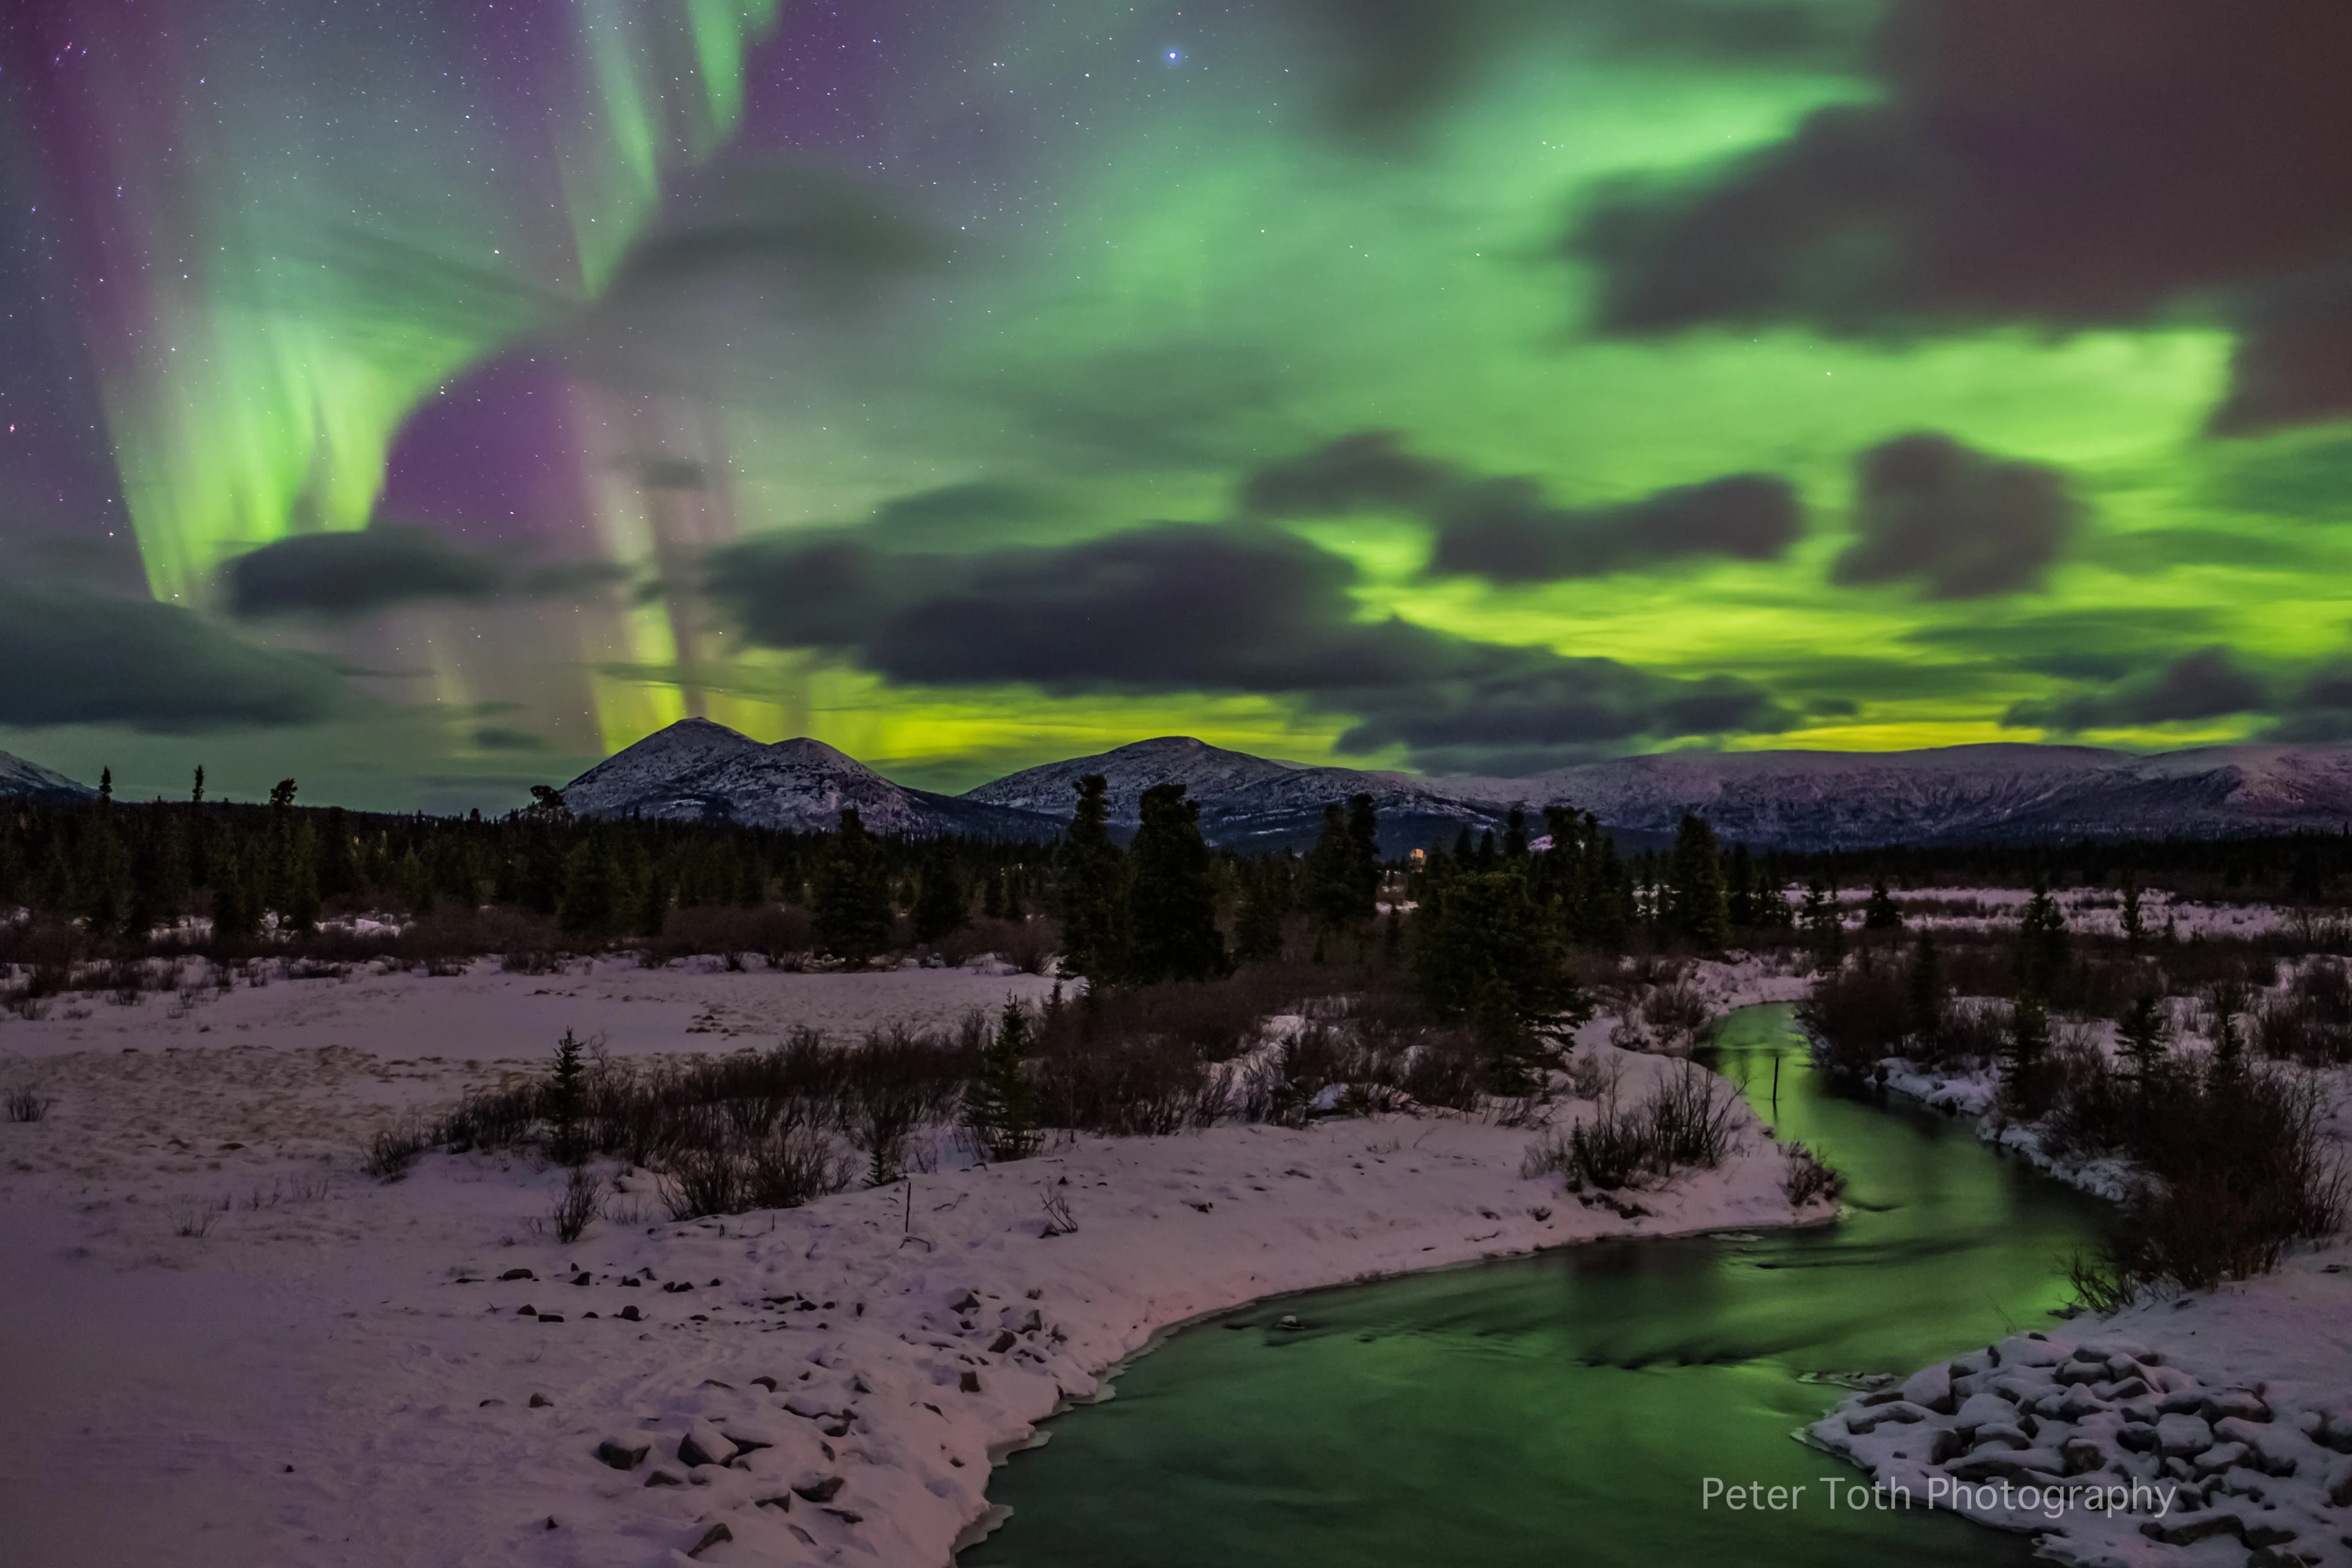 UGC/Peter Toth/Dec. 31, 2015/Whitehorse, Yukon: Northern Lights, Auroras. Description: My way of celebrating new years, a bottle of wine, a camera and some natural fireworks in the sky at Fish Lake in Whitehorse, Yukon.